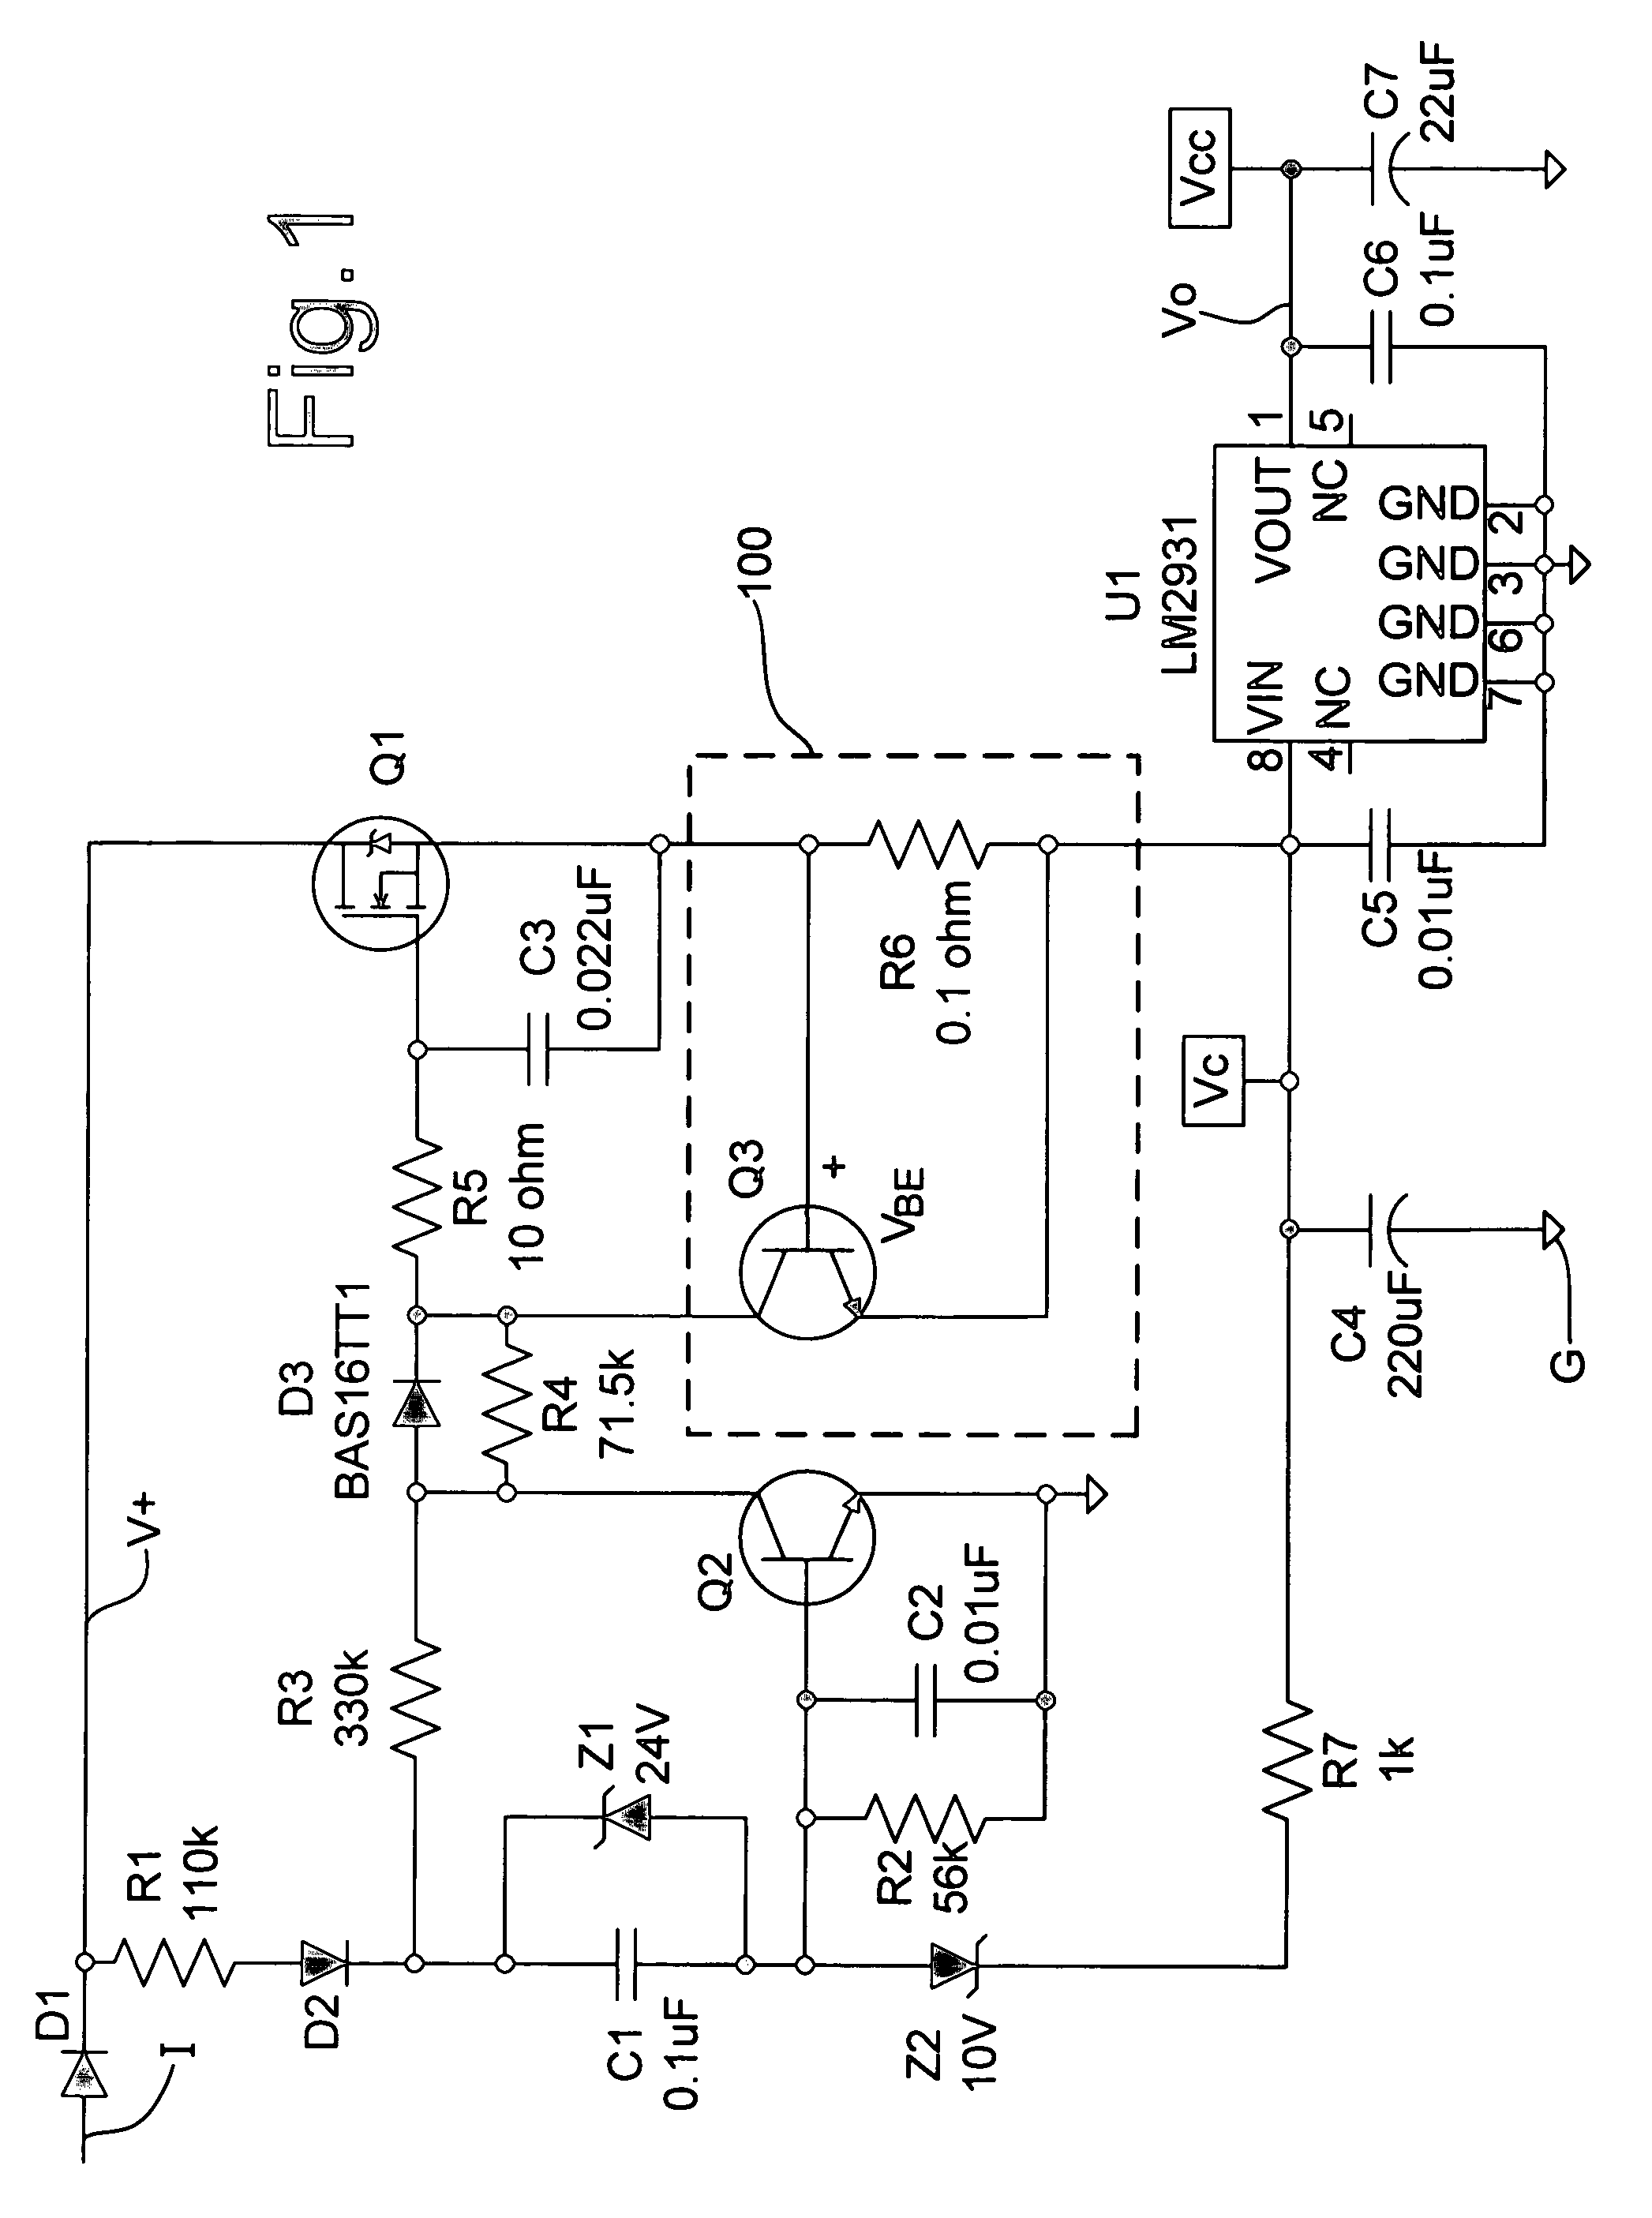 DV/dt-detecting overcurrent protection circuit for power supply